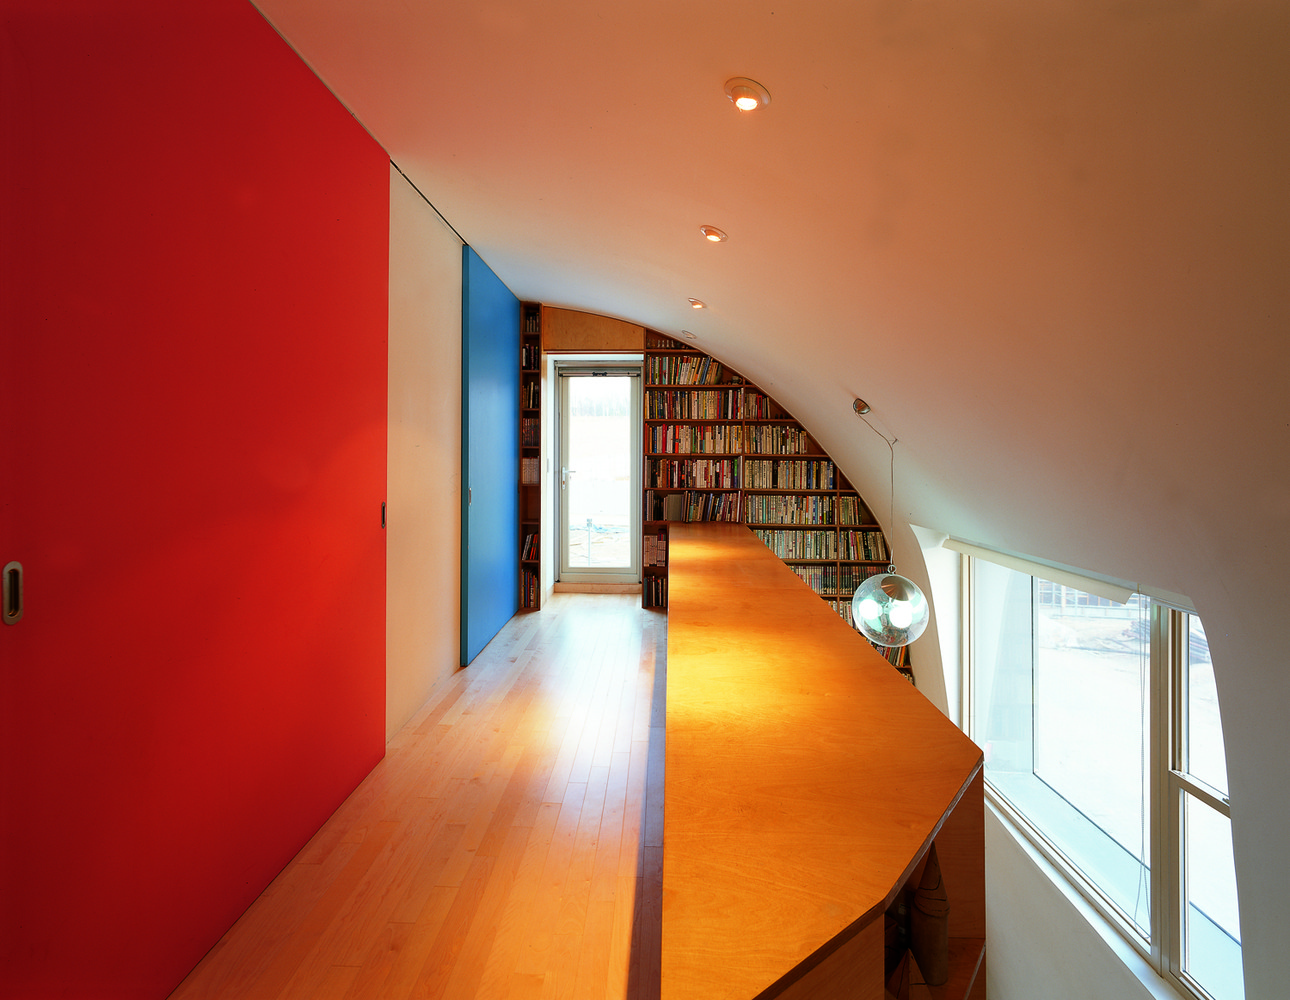 Pixel House interior curved wall